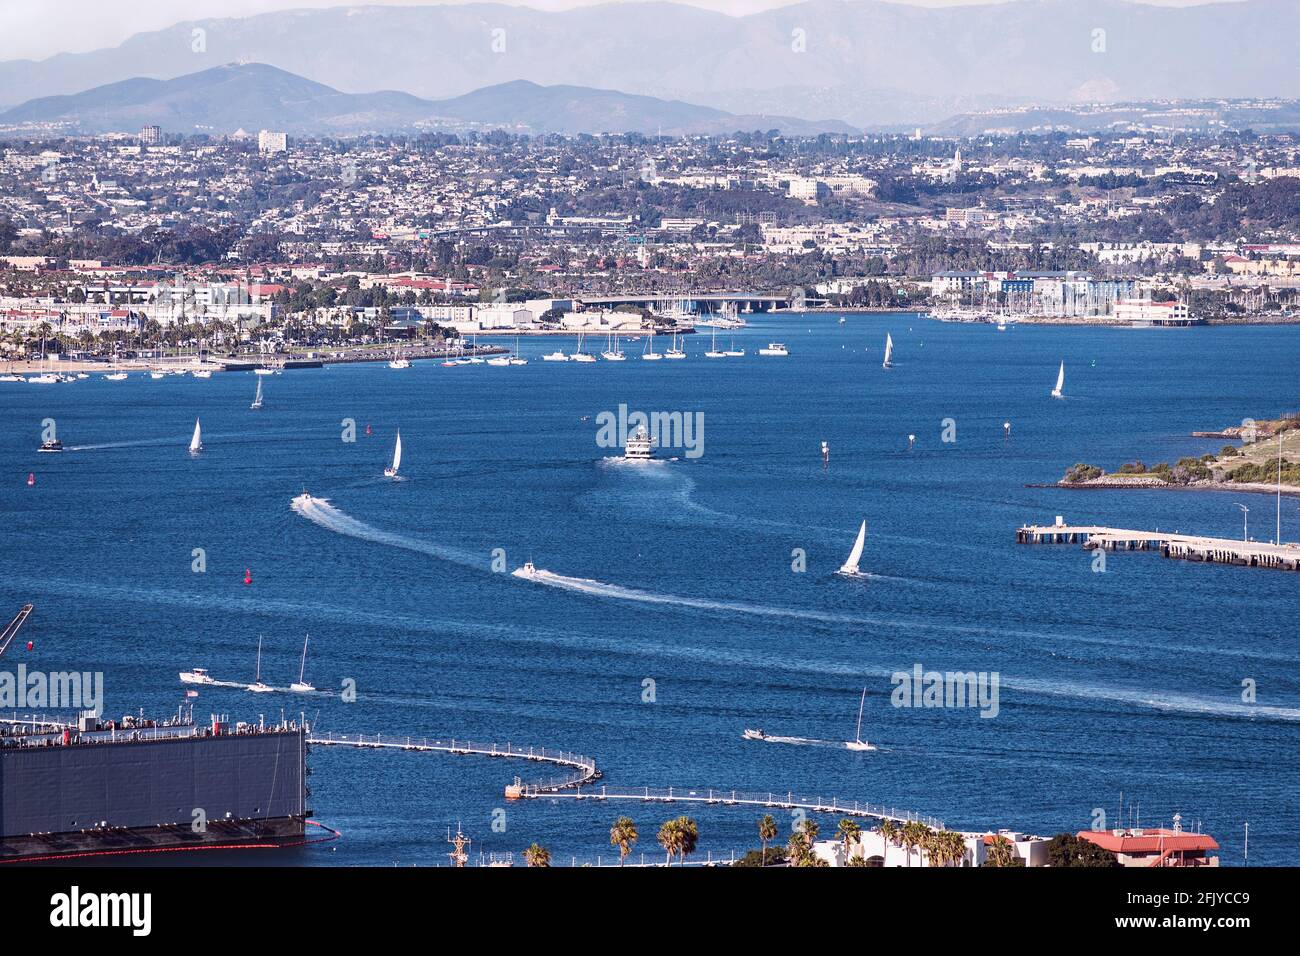 sailboats and harbor cruise ships leave their wakes on the west end of the San Diego Bay with the city and blurred mountains in the background Stock Photo